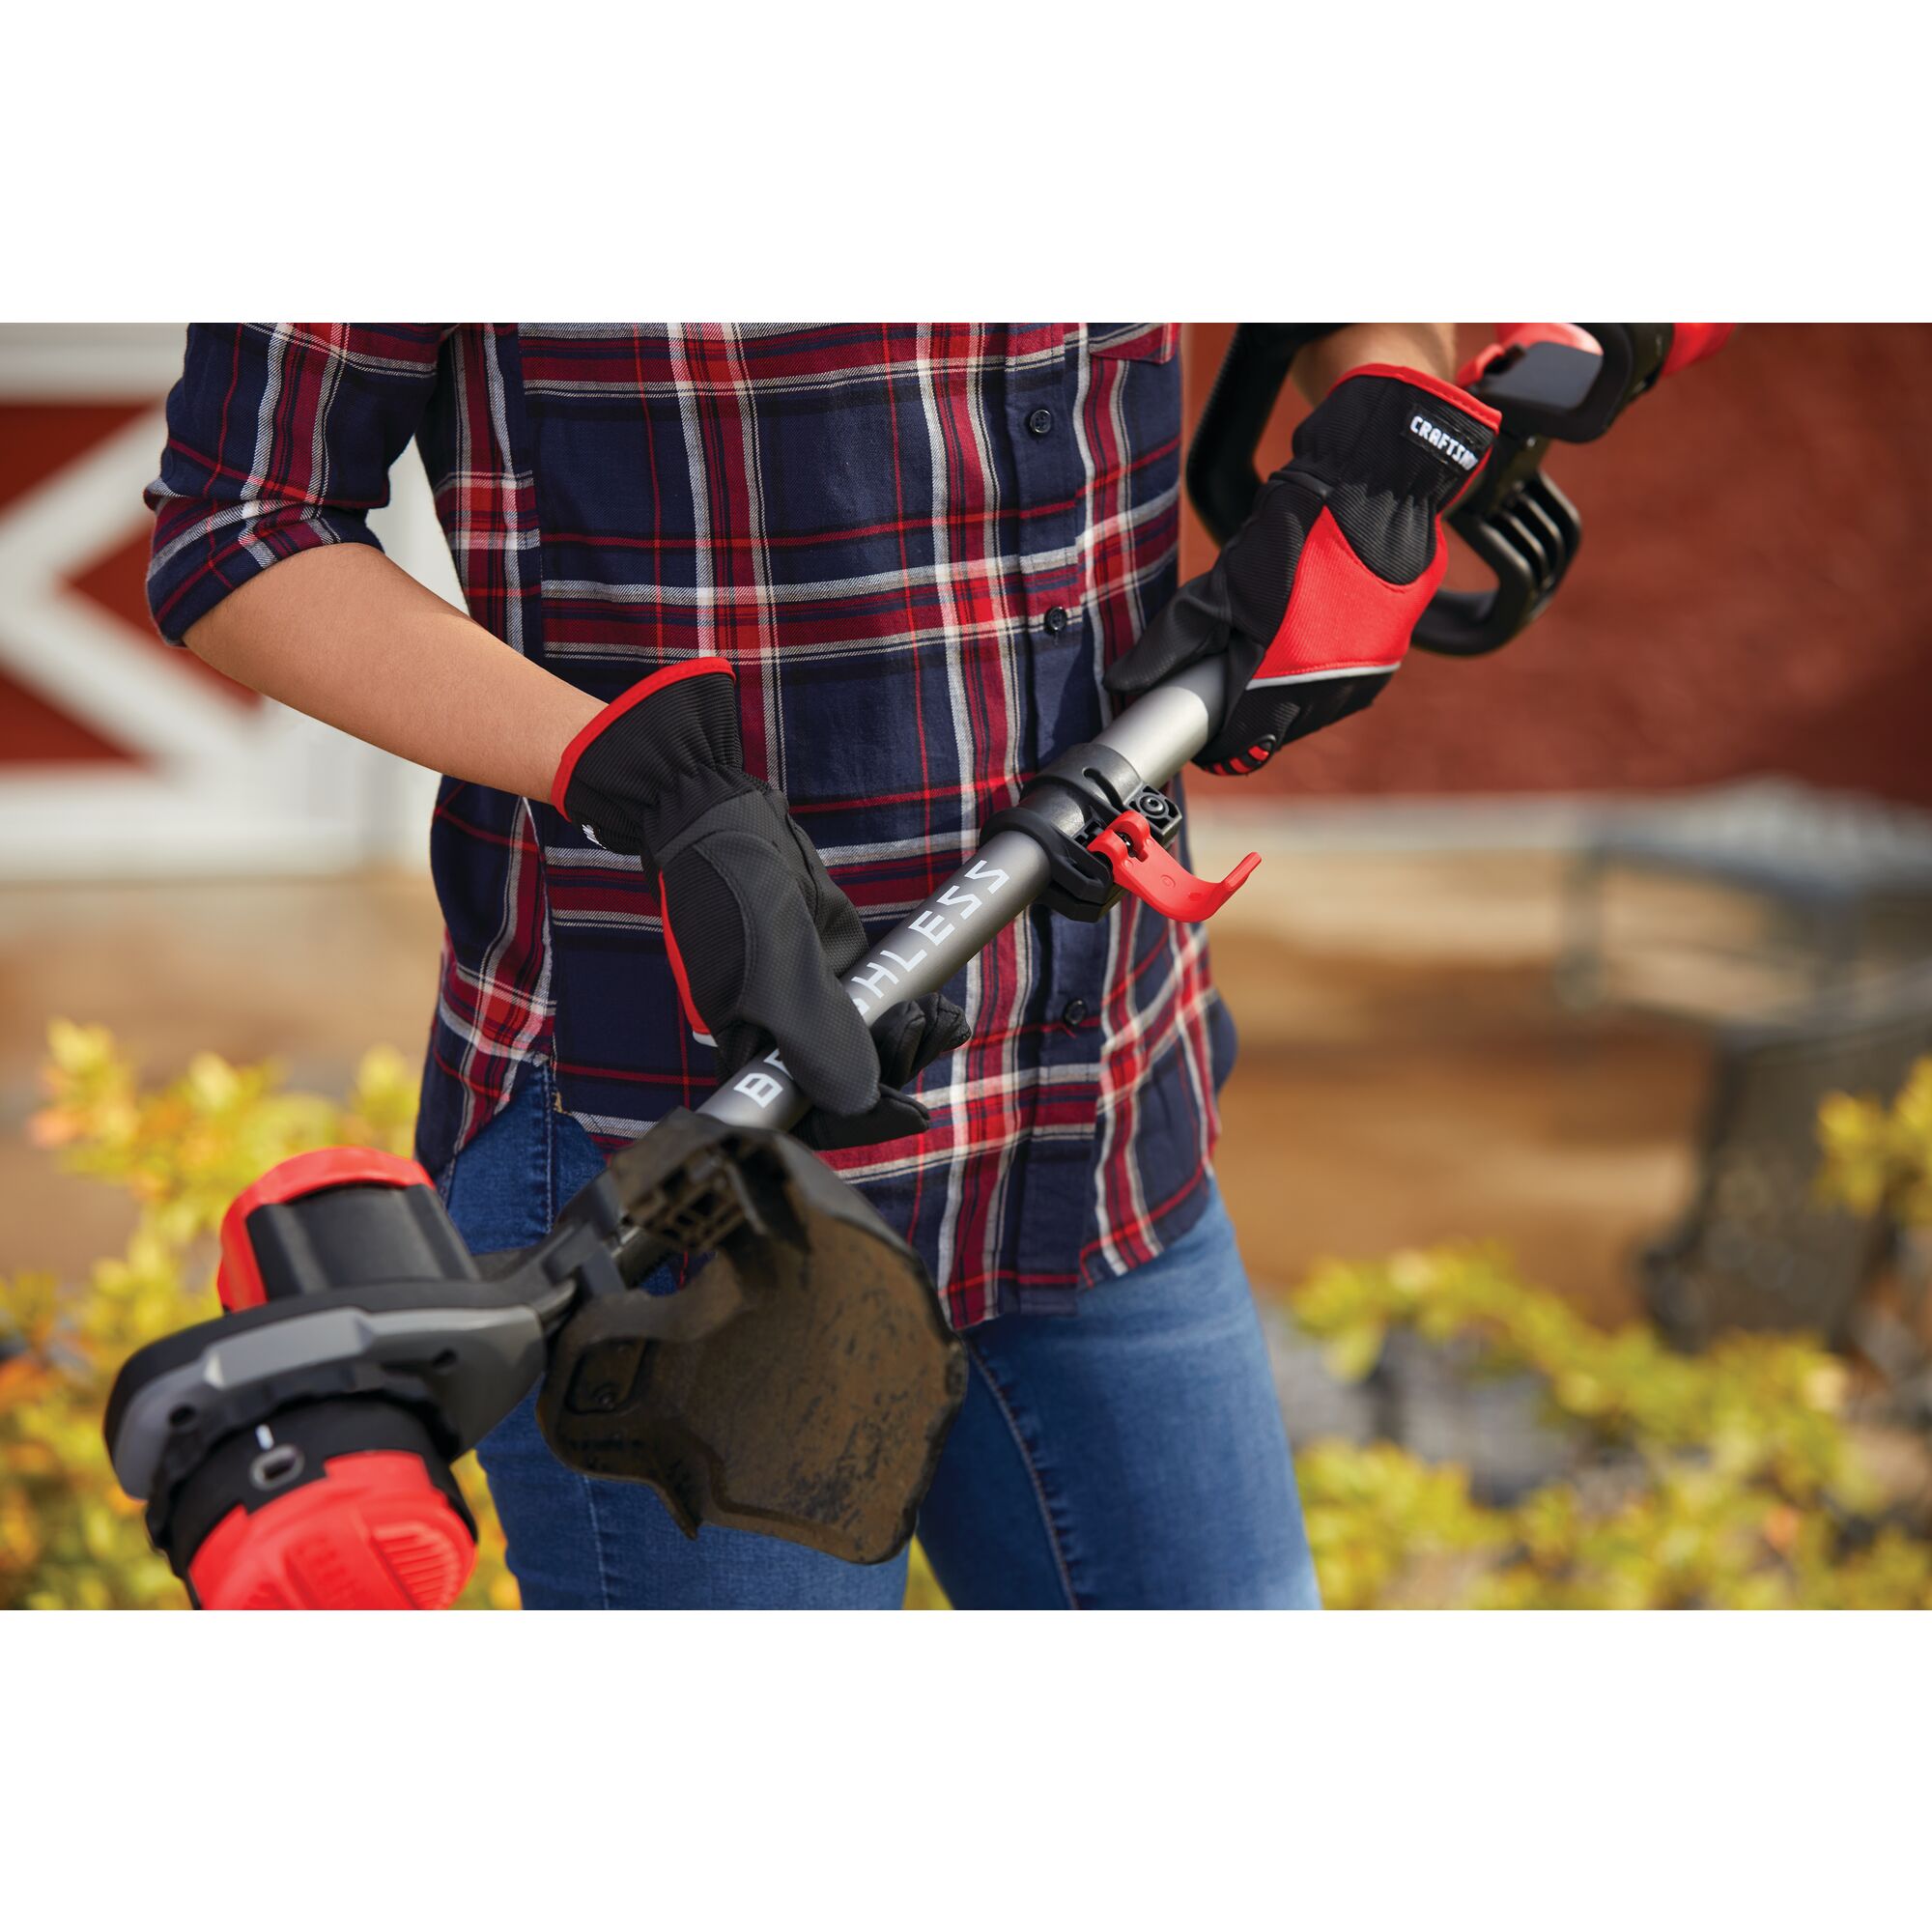 Adjustable pole feature of 20 volt weedwacker 13 inch brushless cordless string trimmer with quickwind 4.0 ampere per hour.